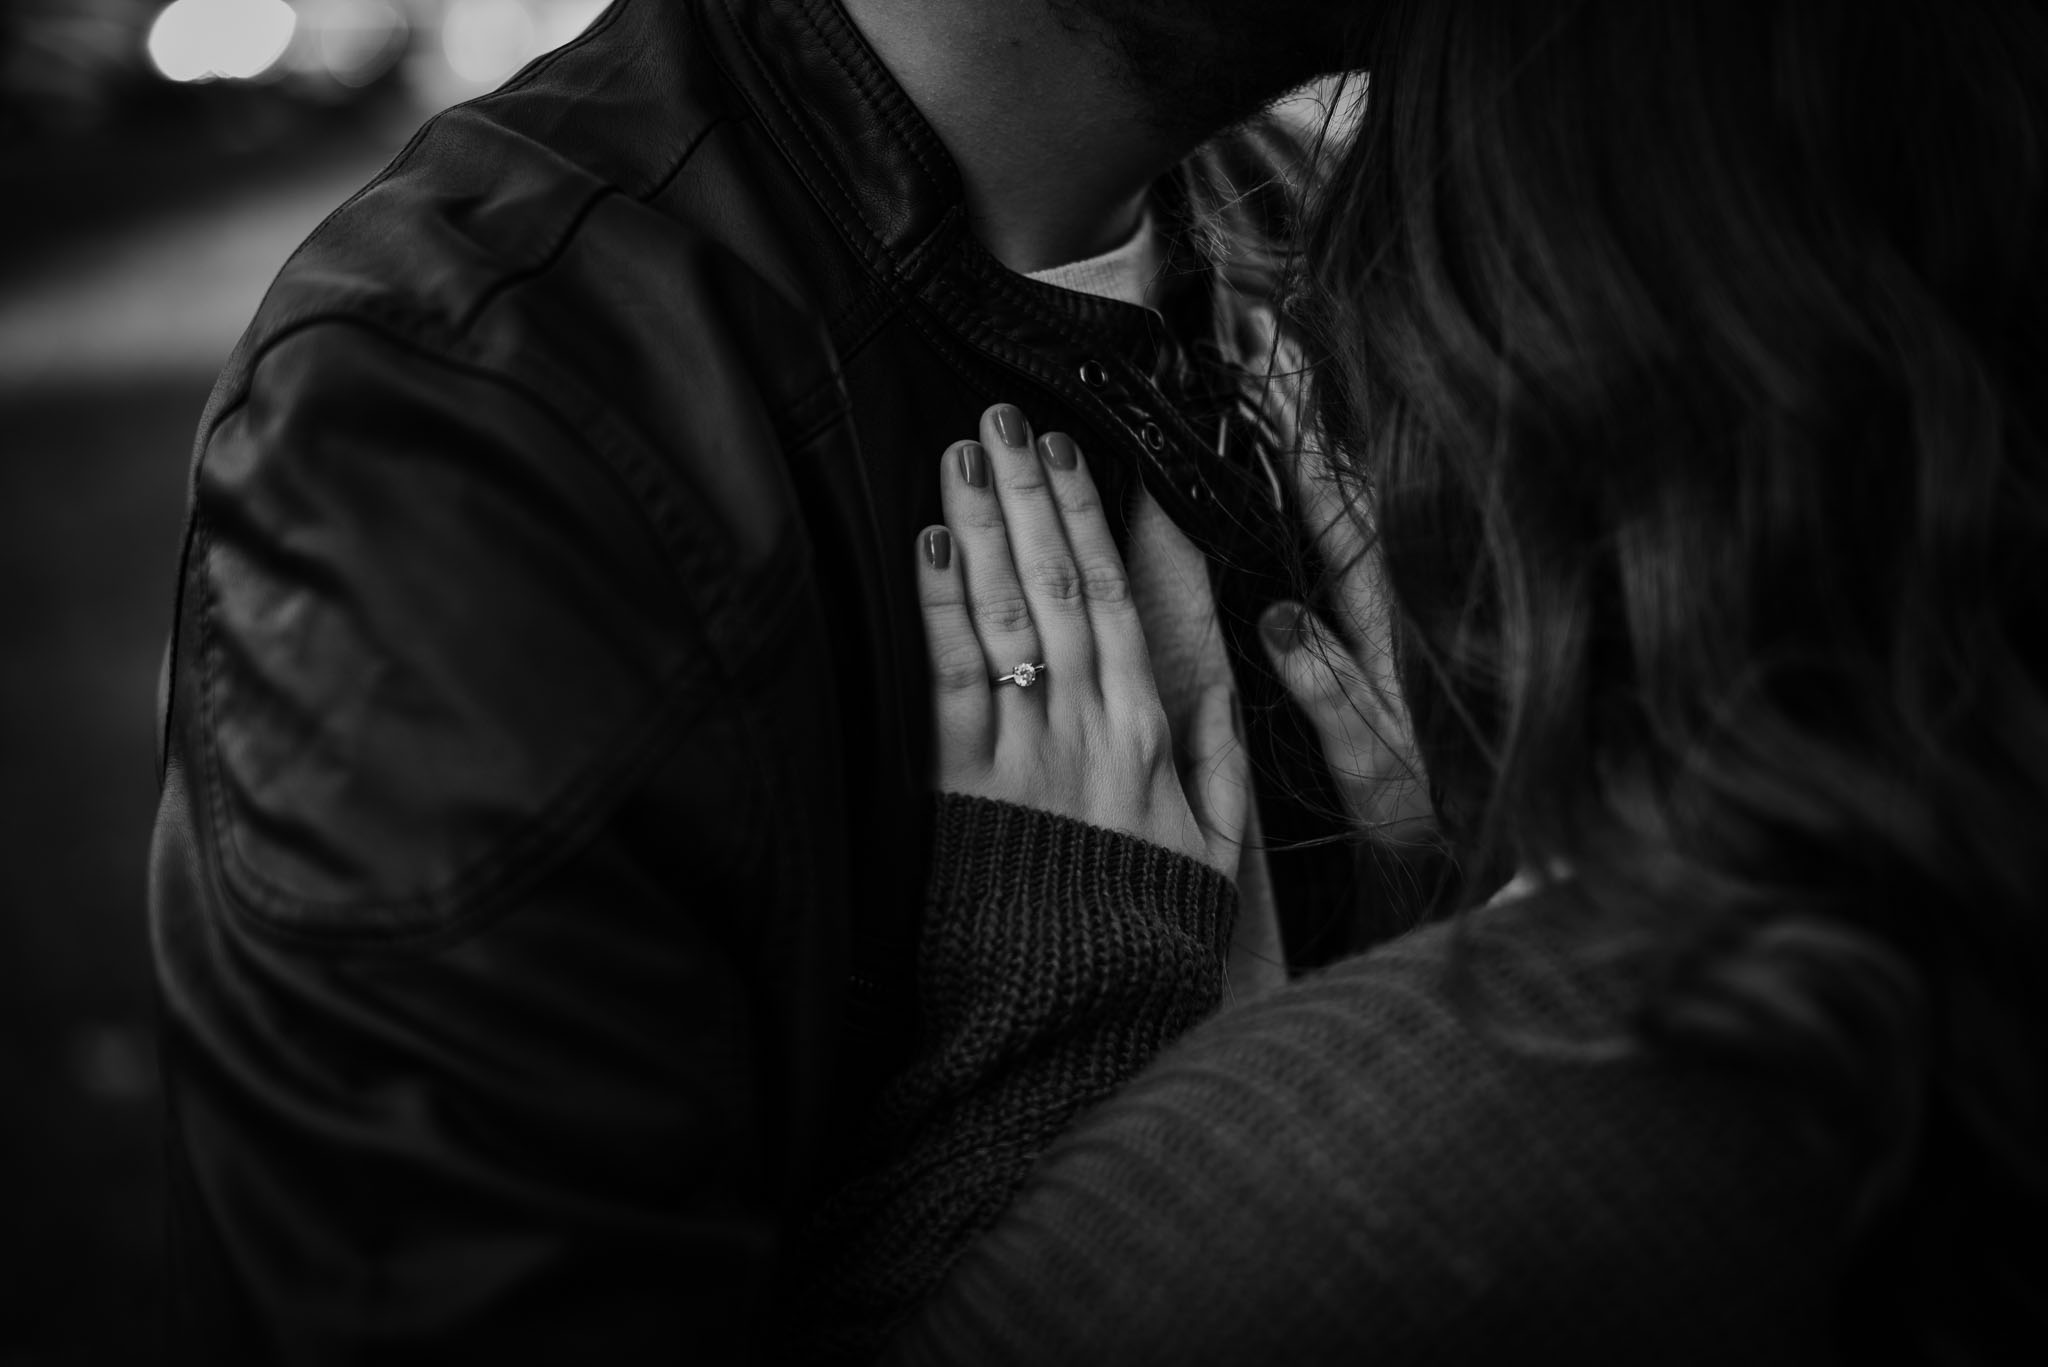 Engagement ring in black and white with her hand resting on his chest